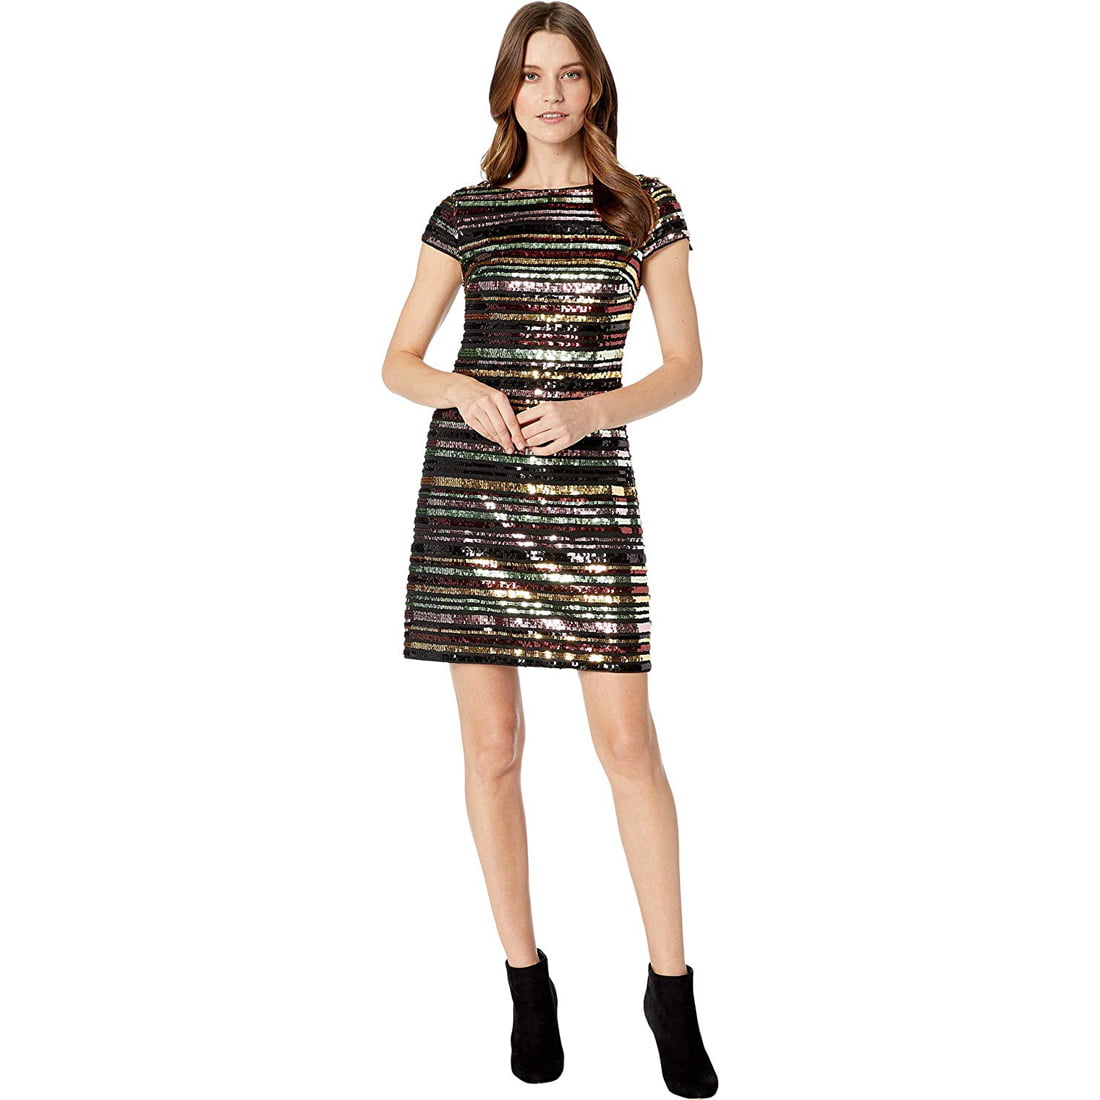 Vince Camuto Printed Cap Sleeve Shift Dress SIze 4/6/12/14 NWT MSRP $128 